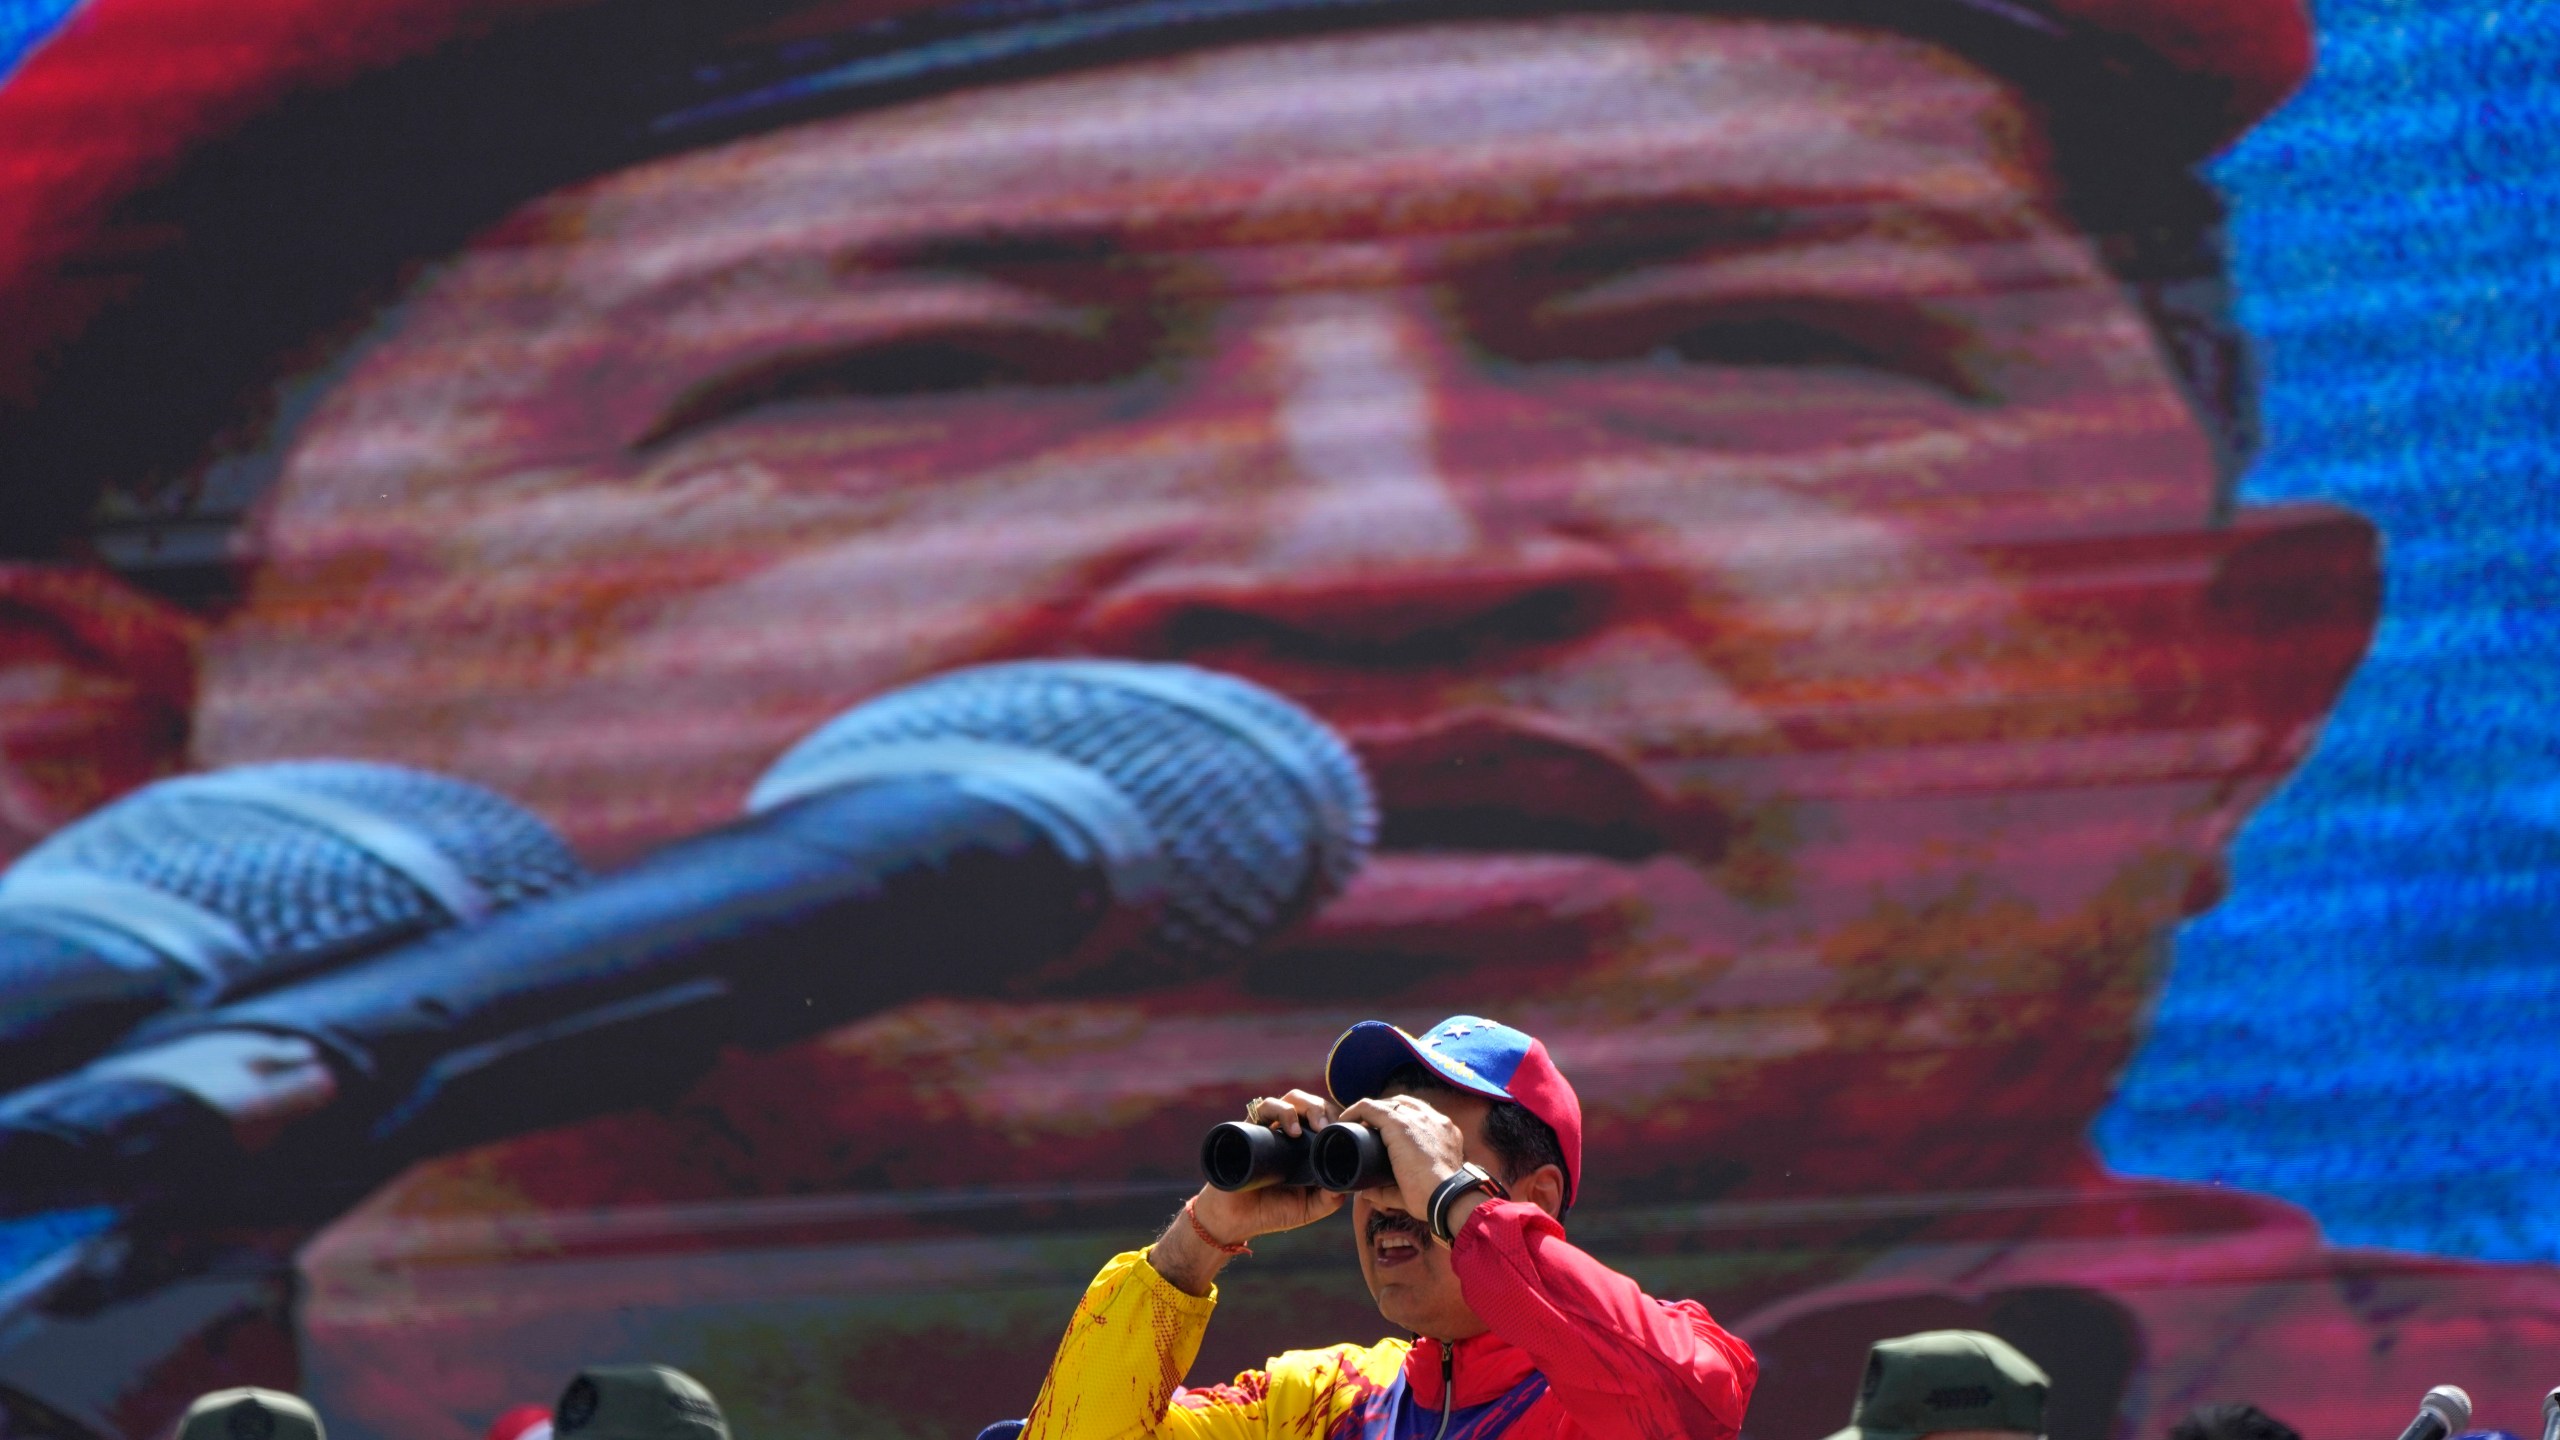 FILE - Venezuelan President Nicolas Maduro looks through a pair of binoculars while standing on the main stage during a commemorative event, in Caracas, Venezuela, Feb. 29, 2024. Maduro became Venezuela's interim president in March 2013 after the death of Hugo Chávez and elected a few months later. He is seeking his third six-year term in the upcoming presidential election. (AP Photo/Ariana Cubillos, File)